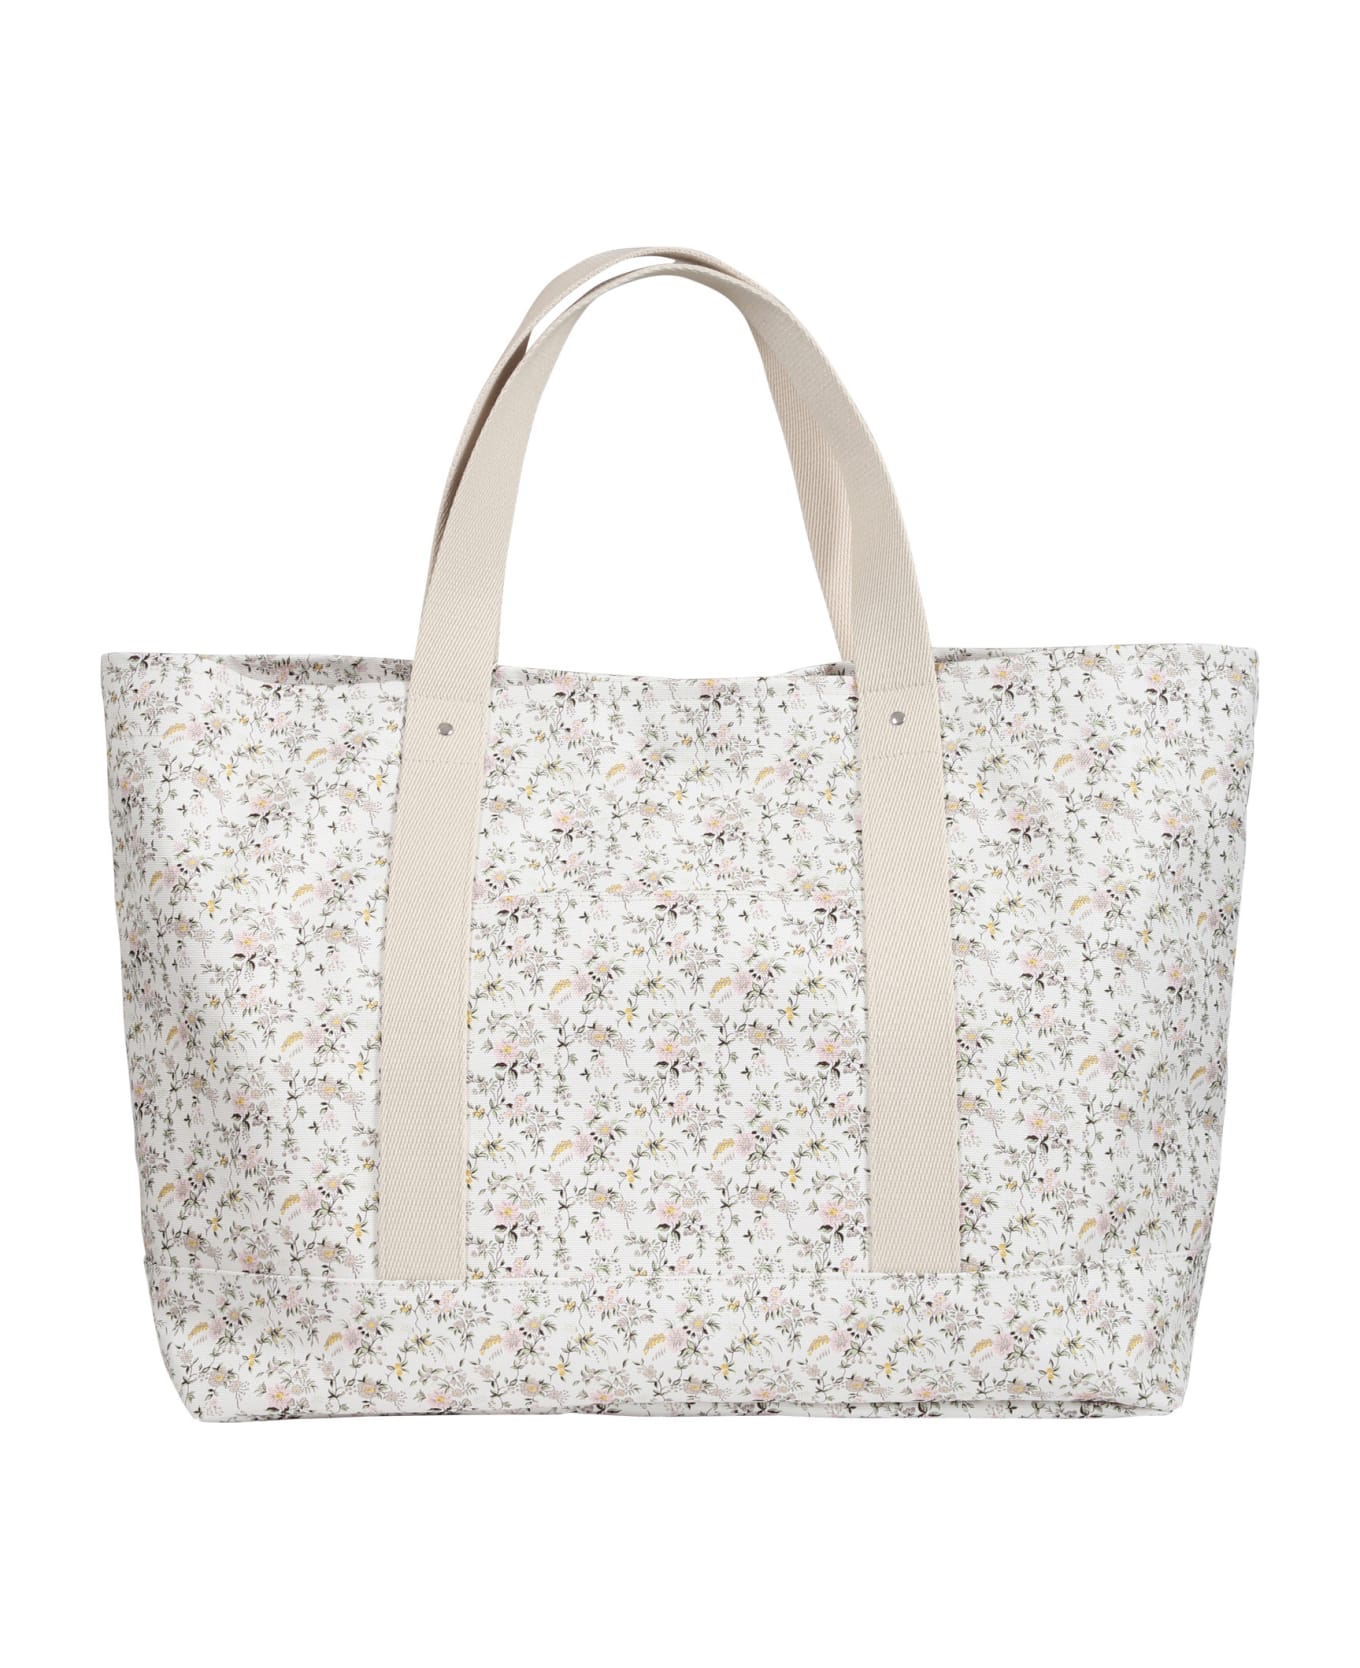 Bonpoint White Mommy Bag For Baby Girl With Floral Print - Multicolor